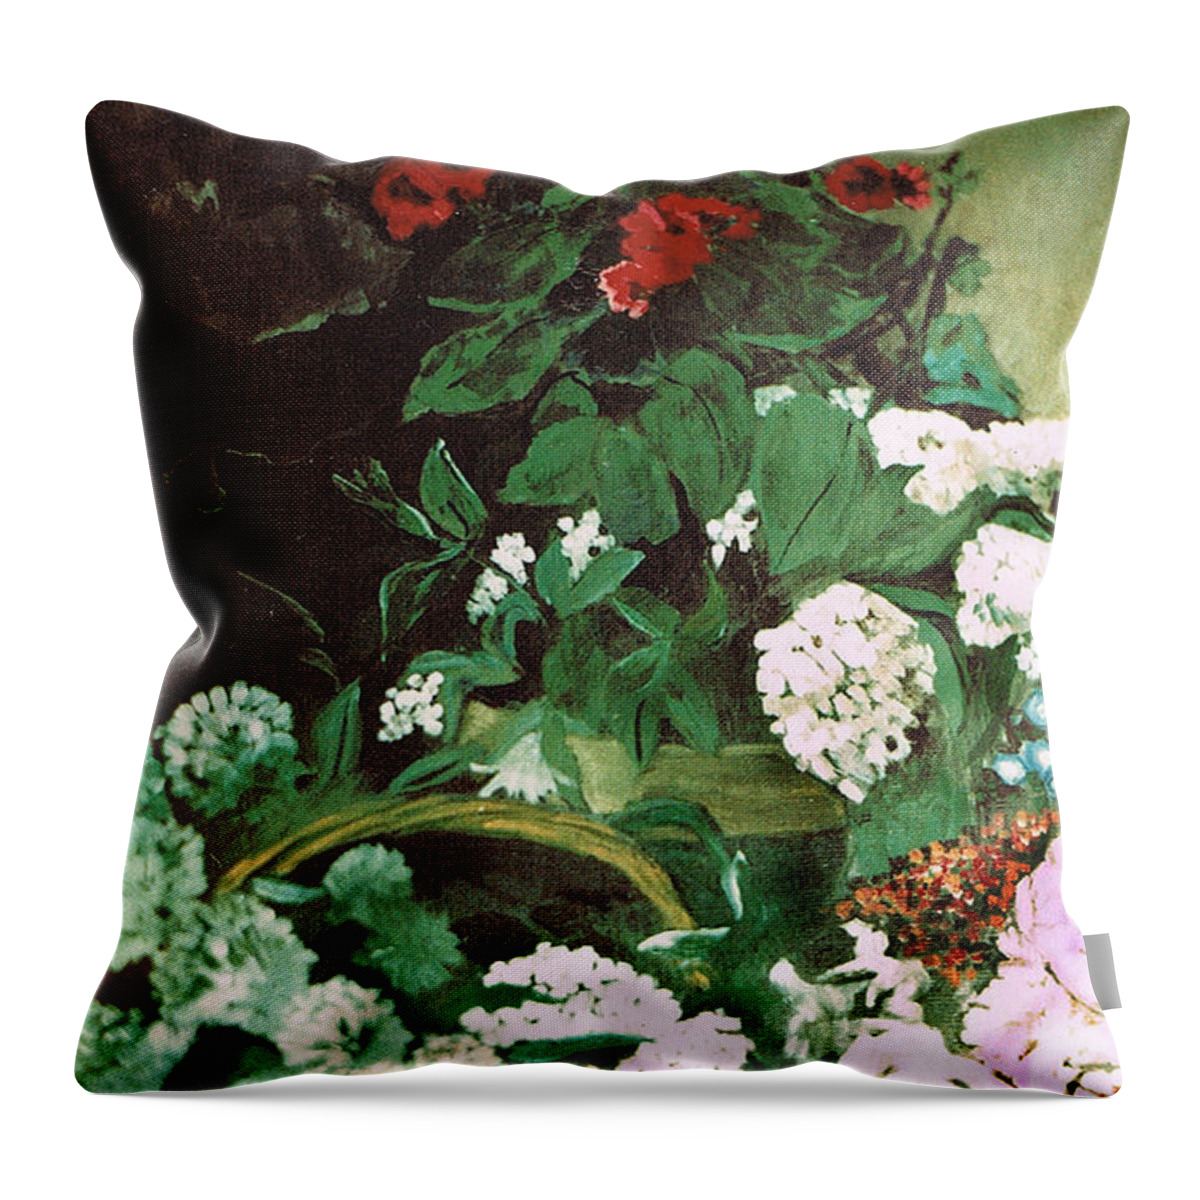 Spring Flowers Study Of Monet Throw Pillow featuring the painting Spring Flowers Study of Monet by Seth Weaver